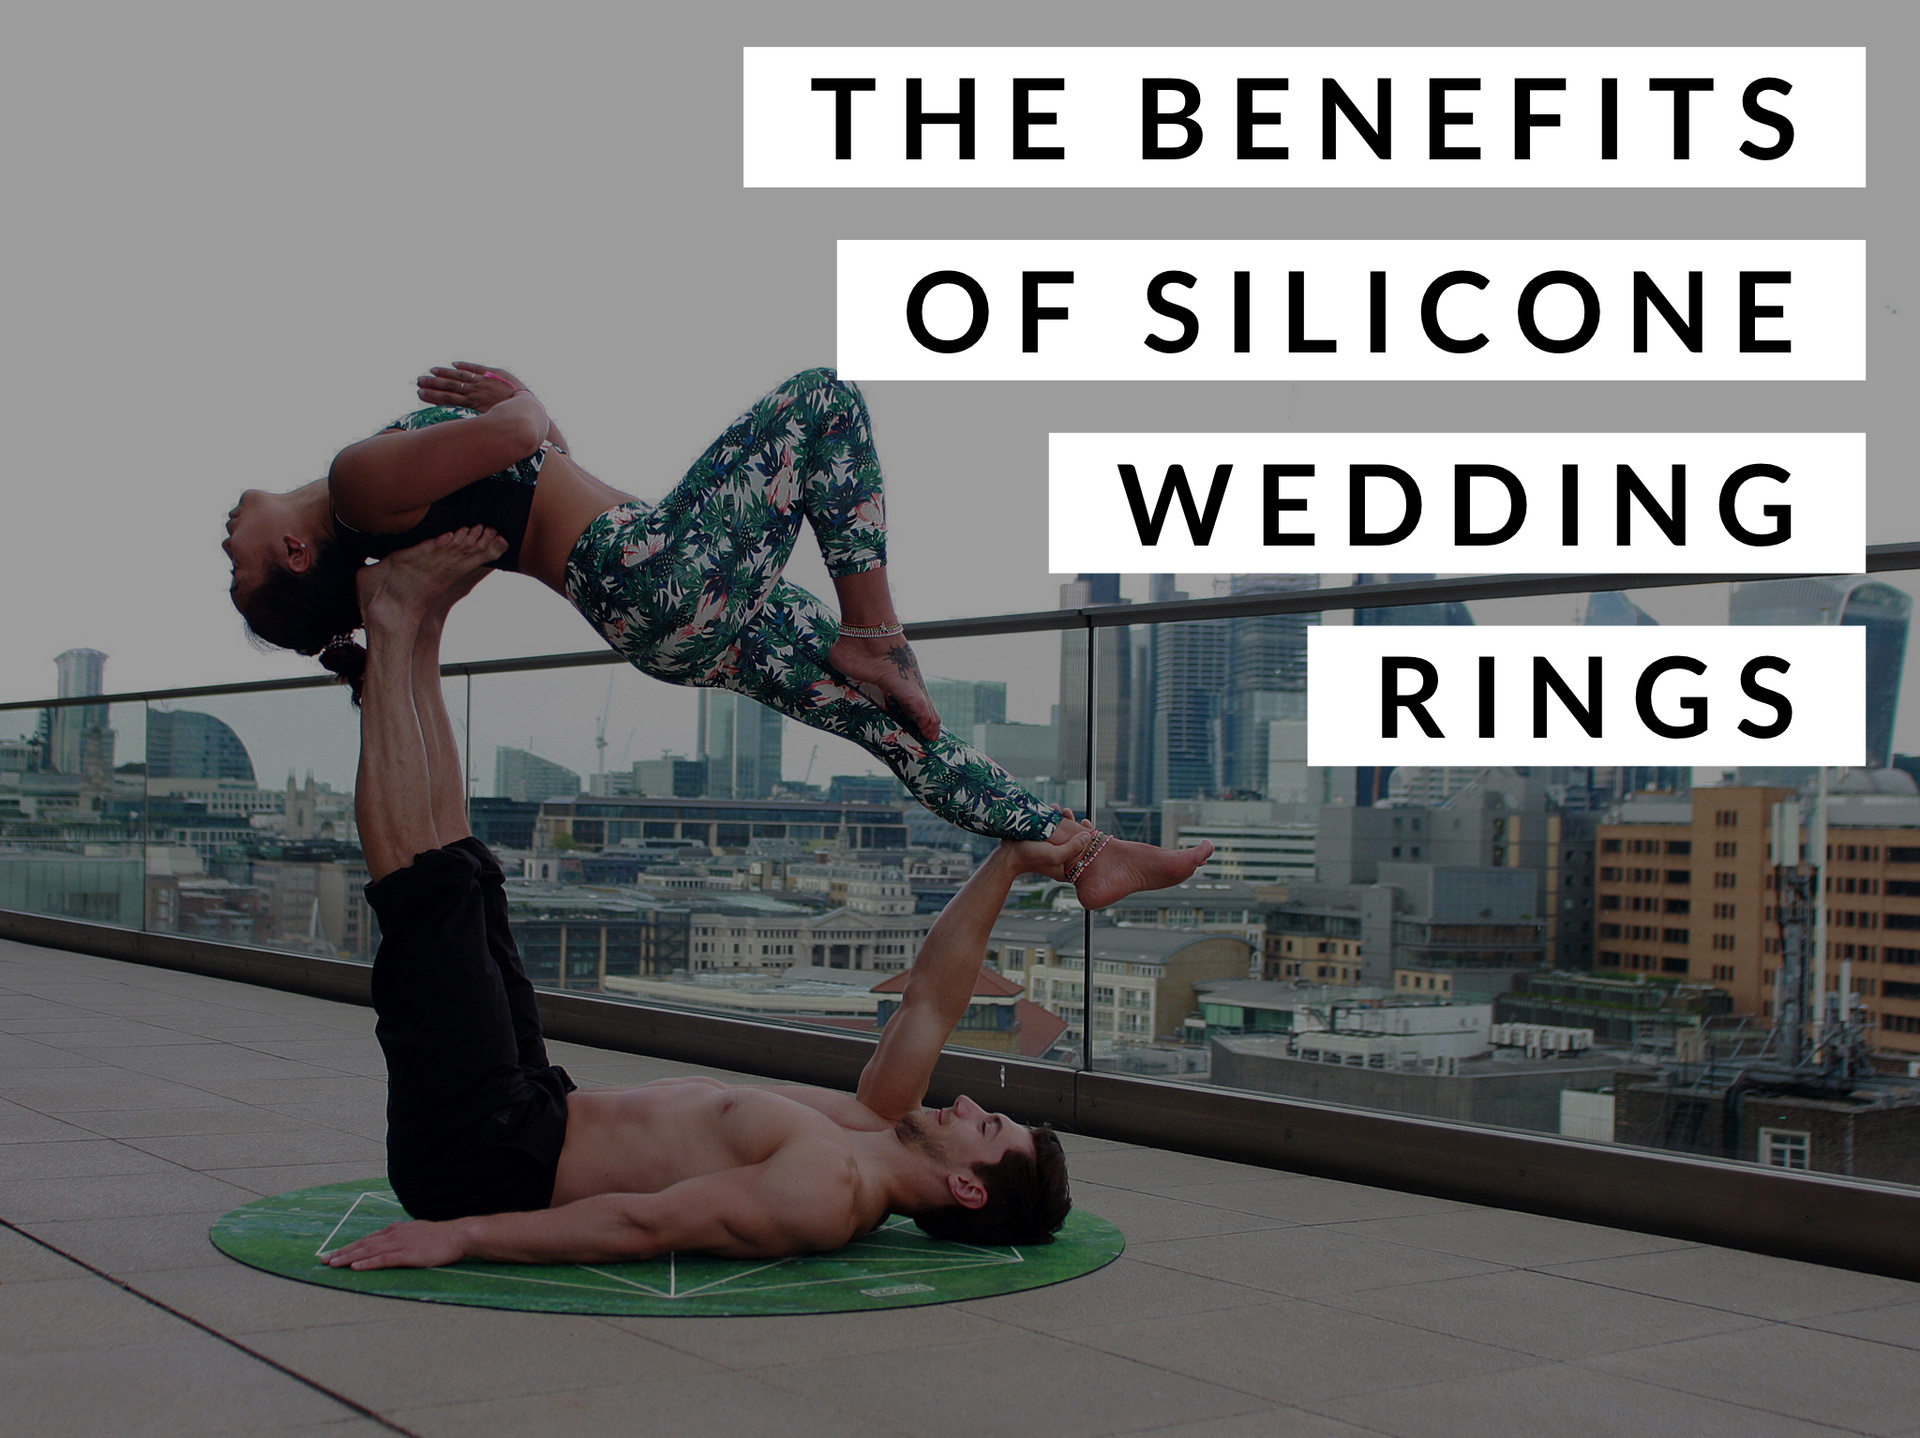 The Benefits of Silicone Wedding Rings